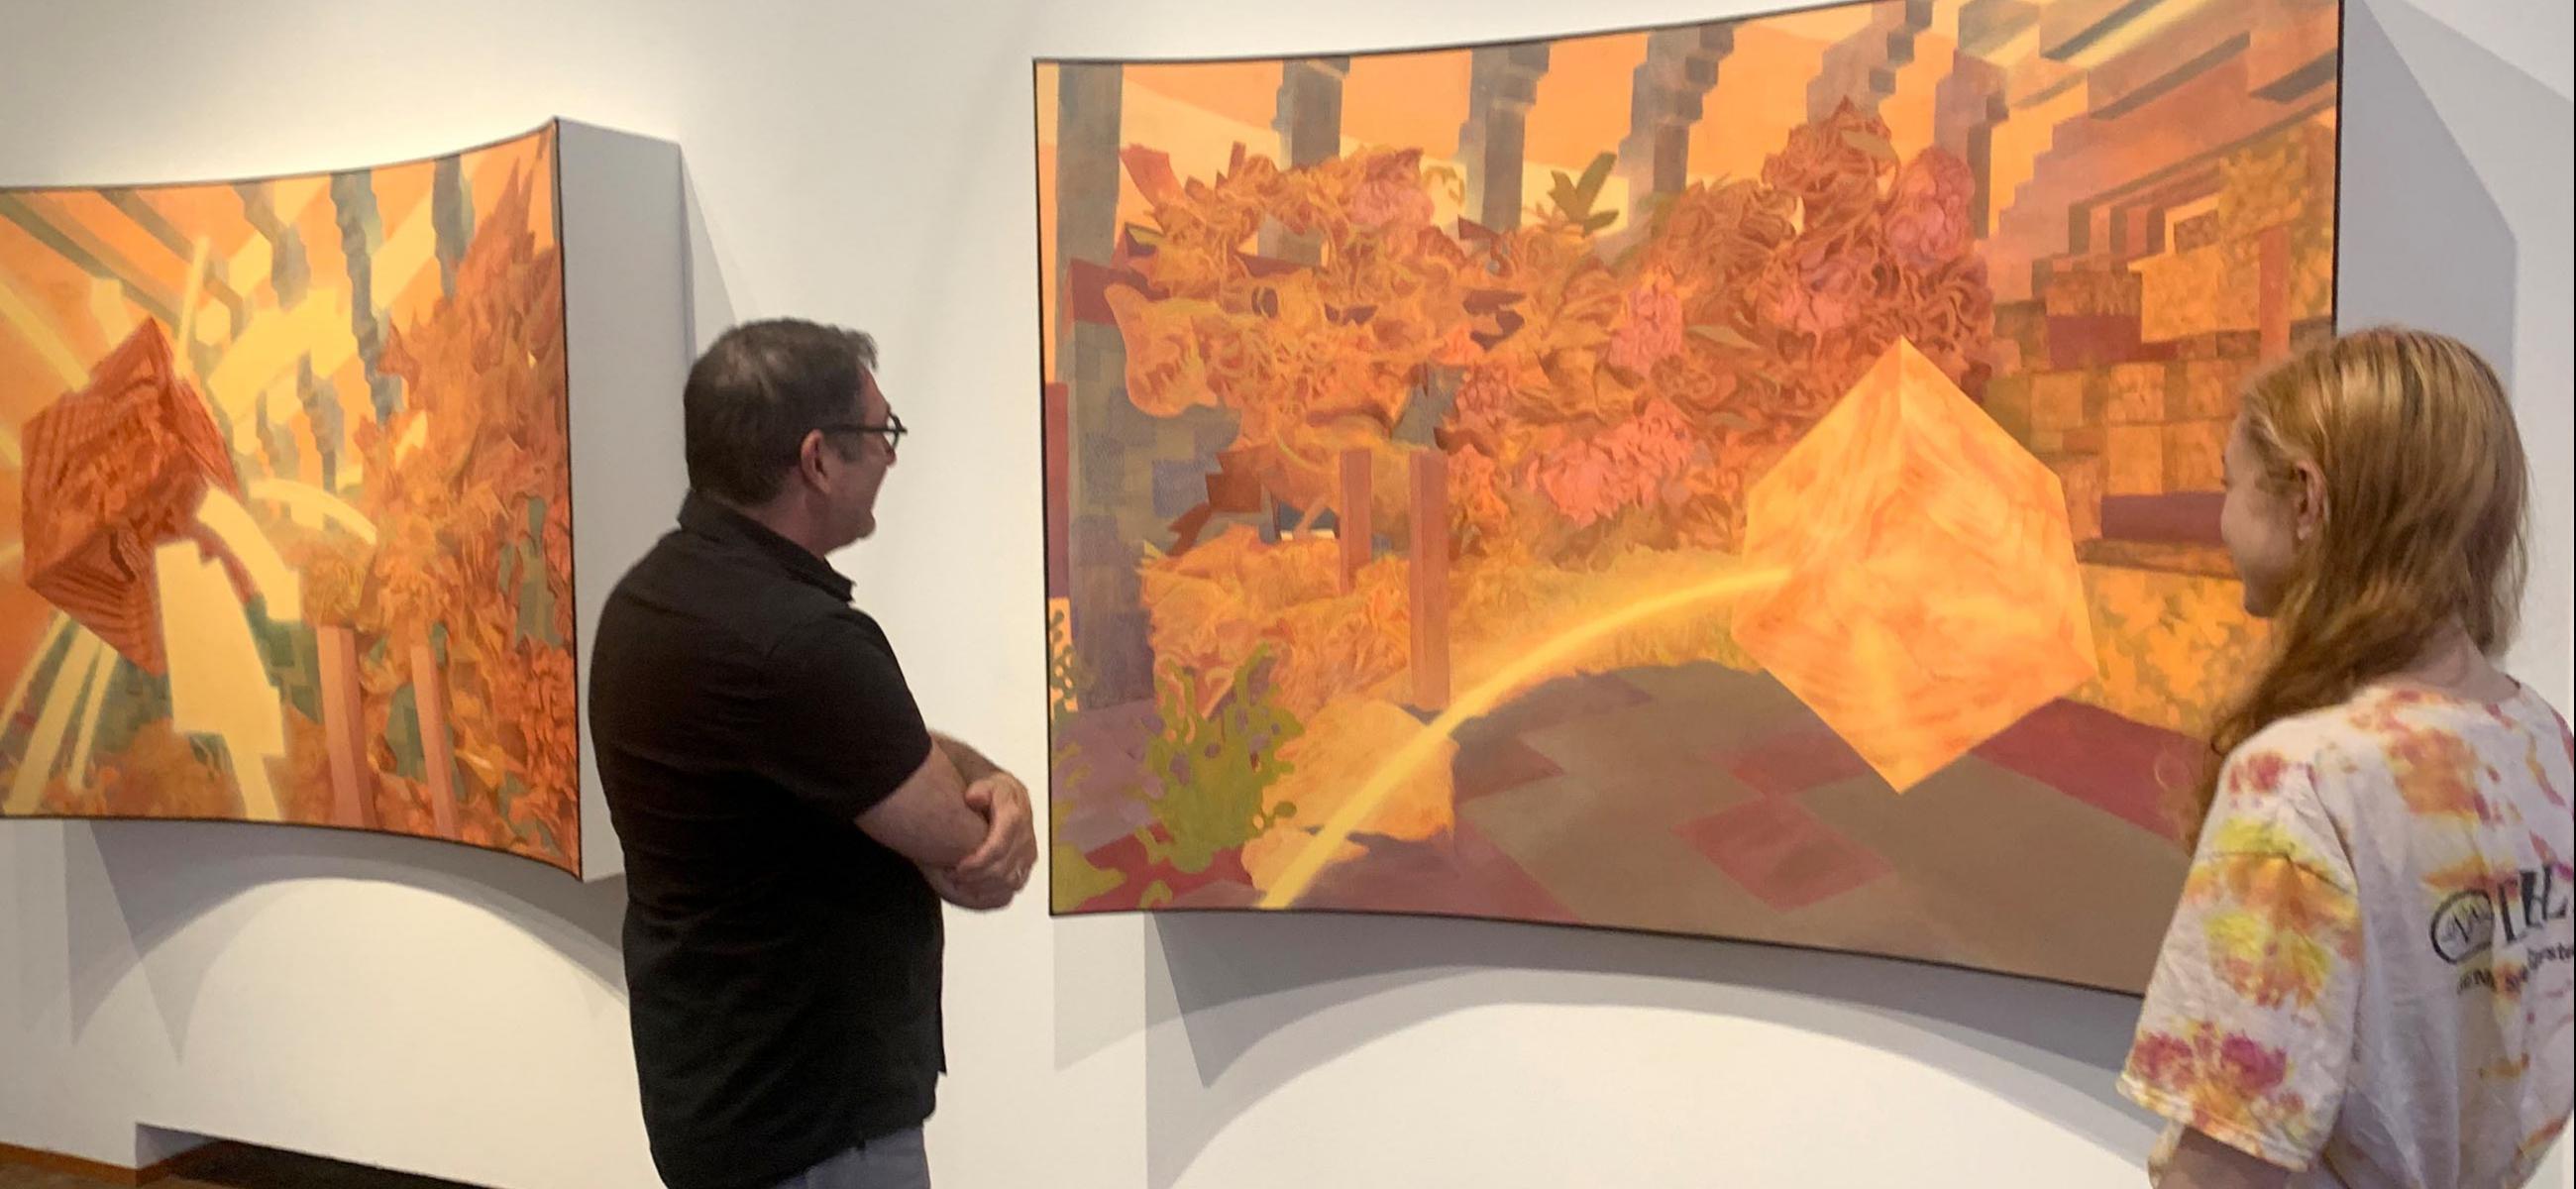 people looking at a large orange artwork in a gallery